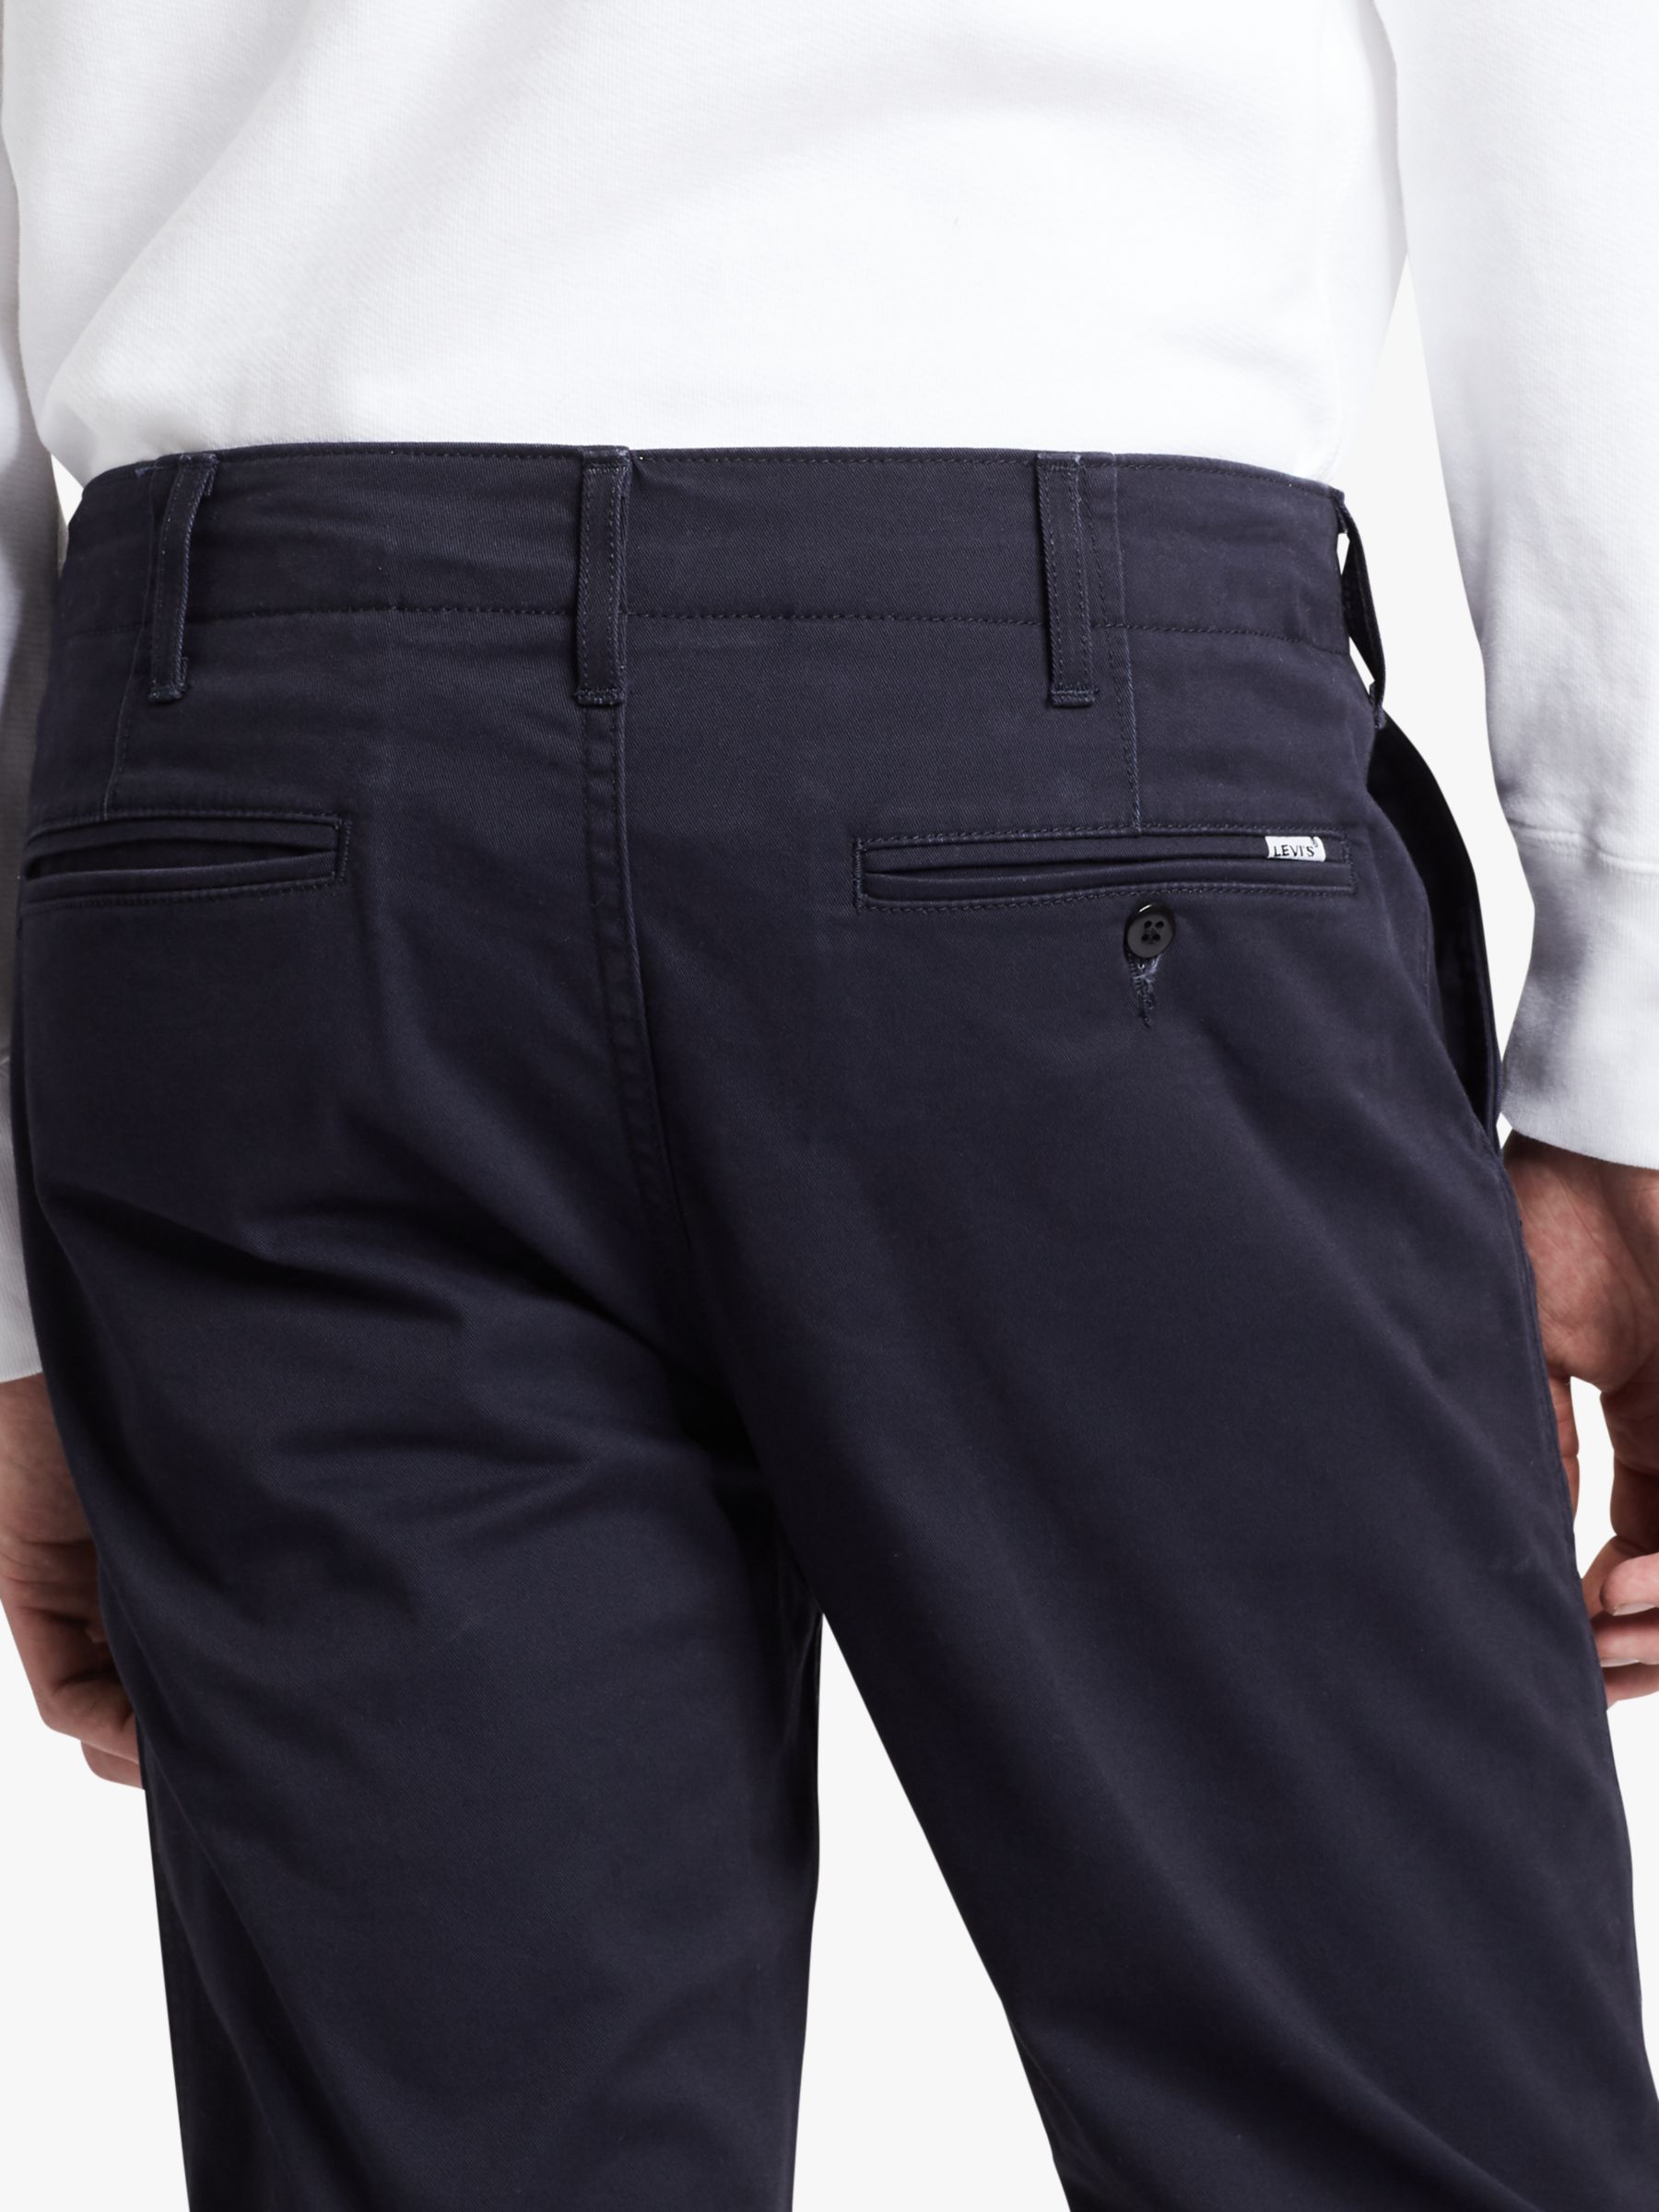 levis 502 true chino trousers